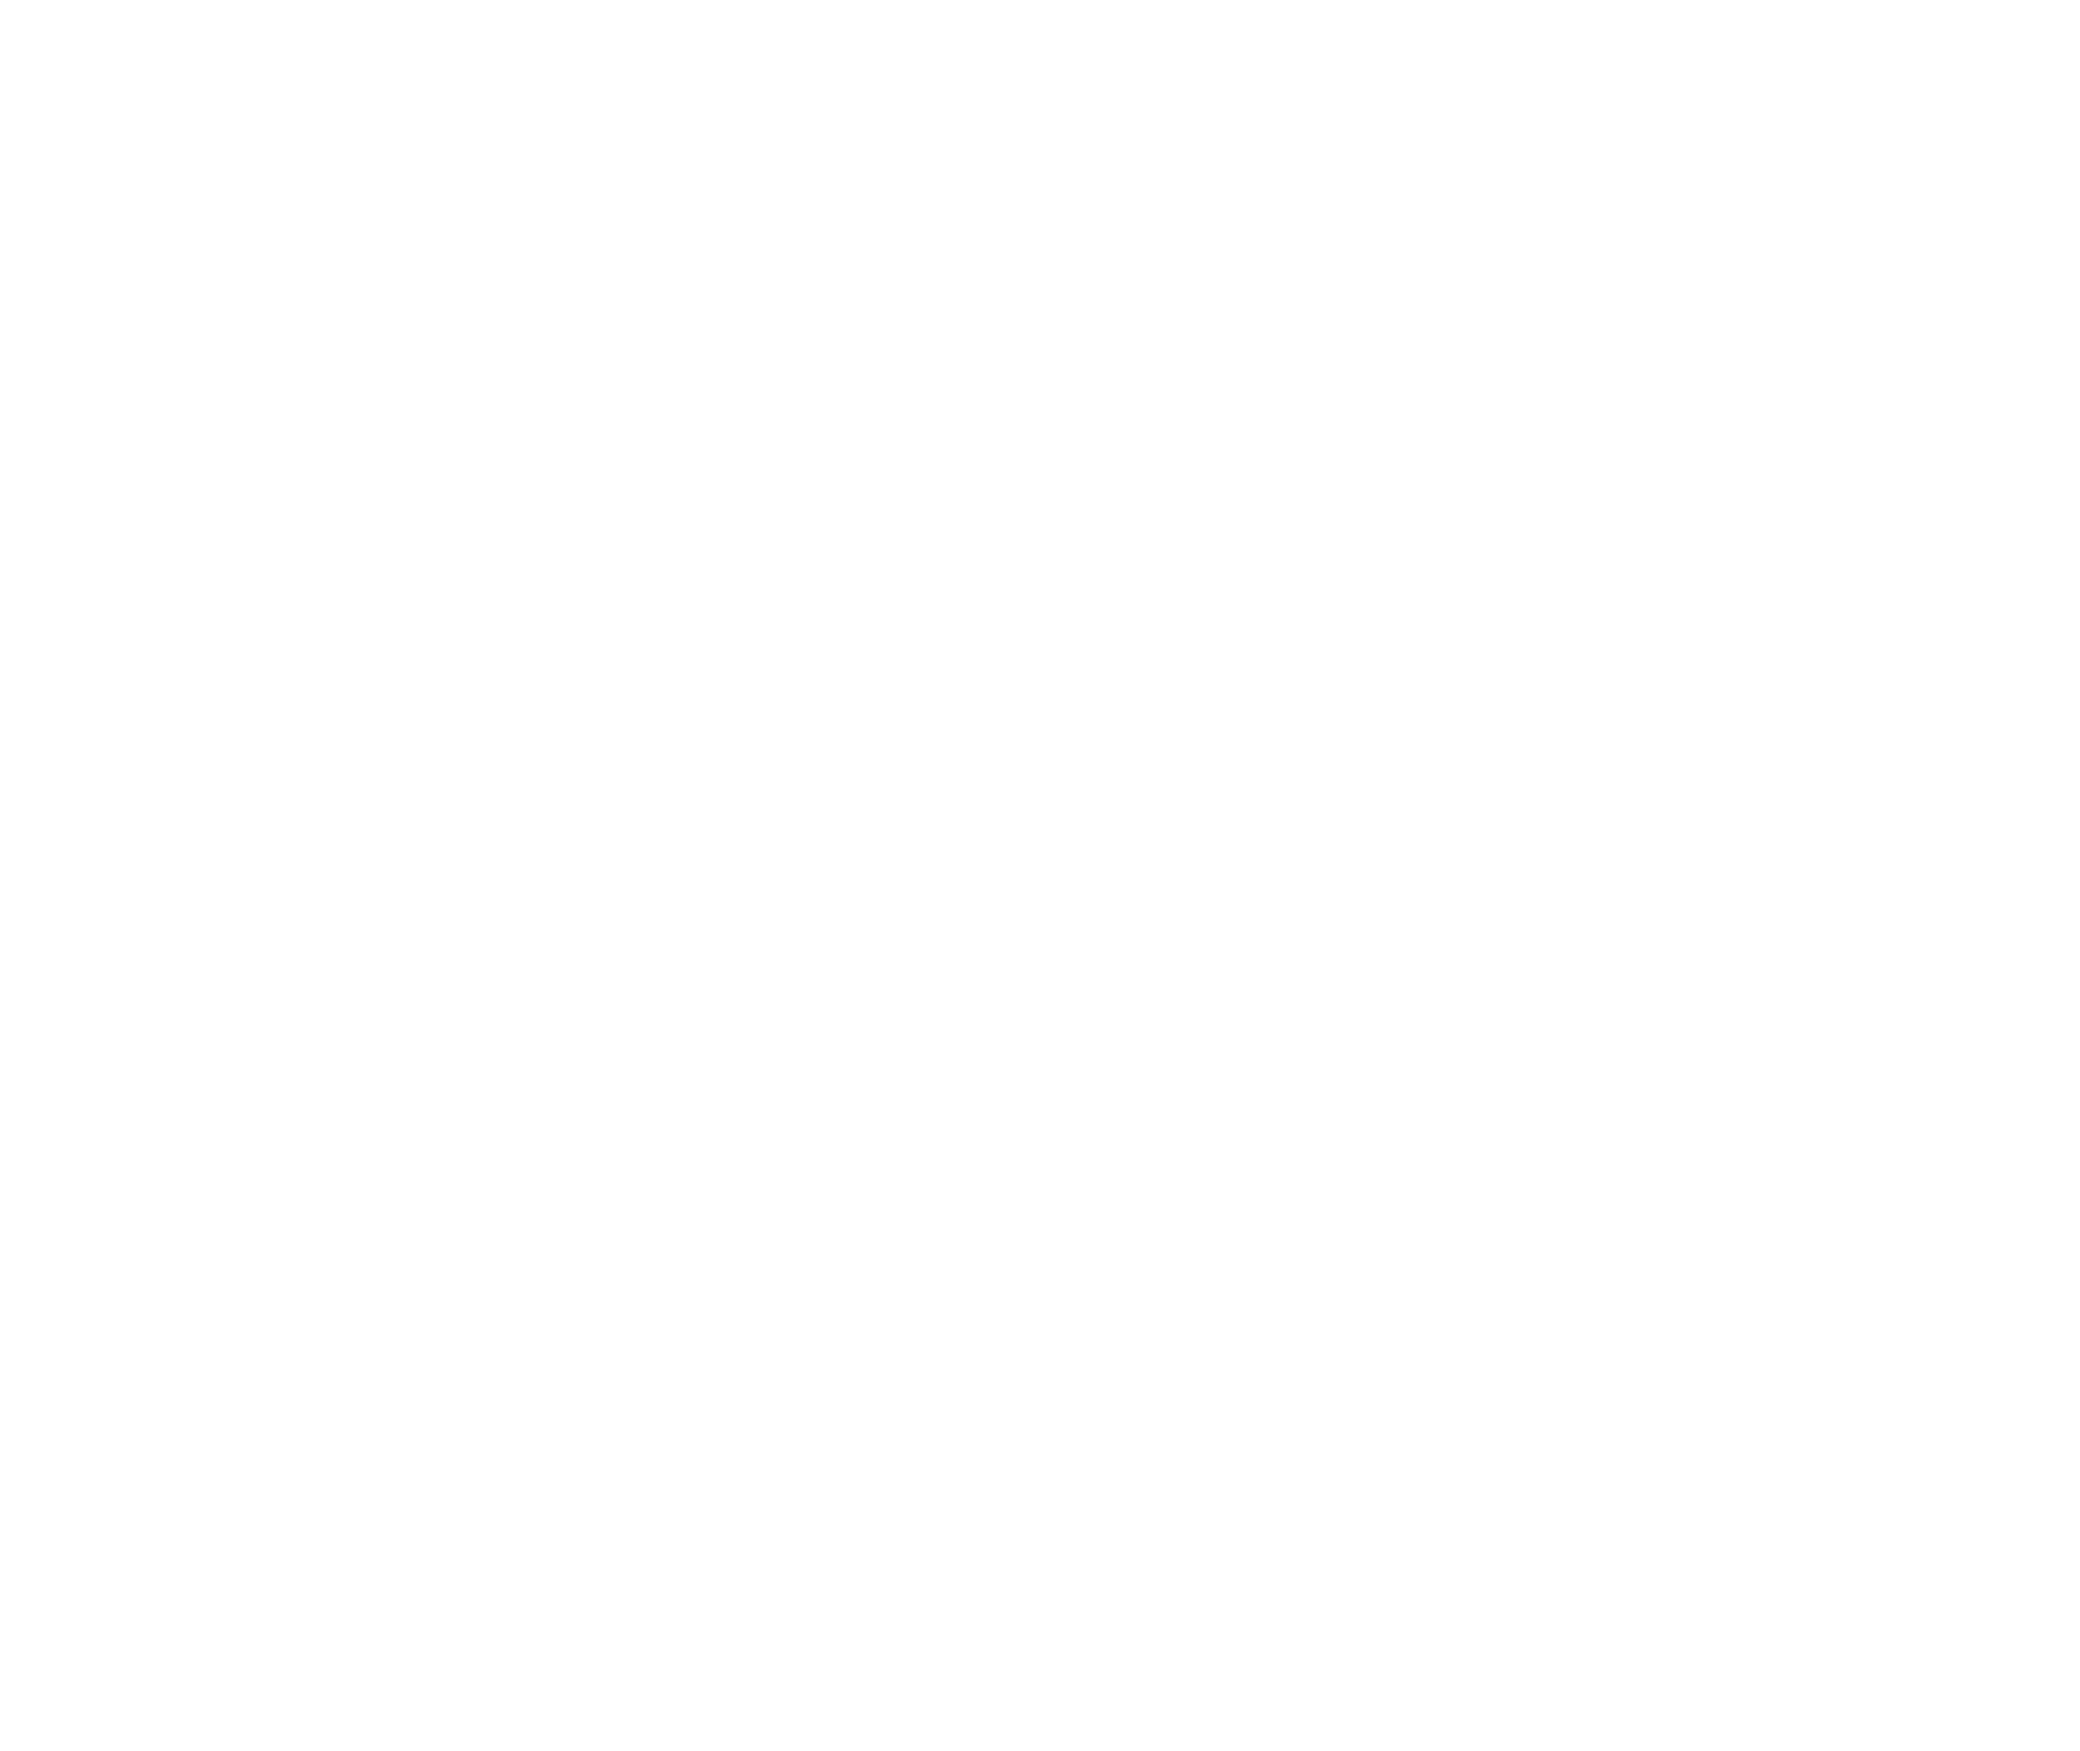 FCC Seals and Logos  Federal Communications Commission